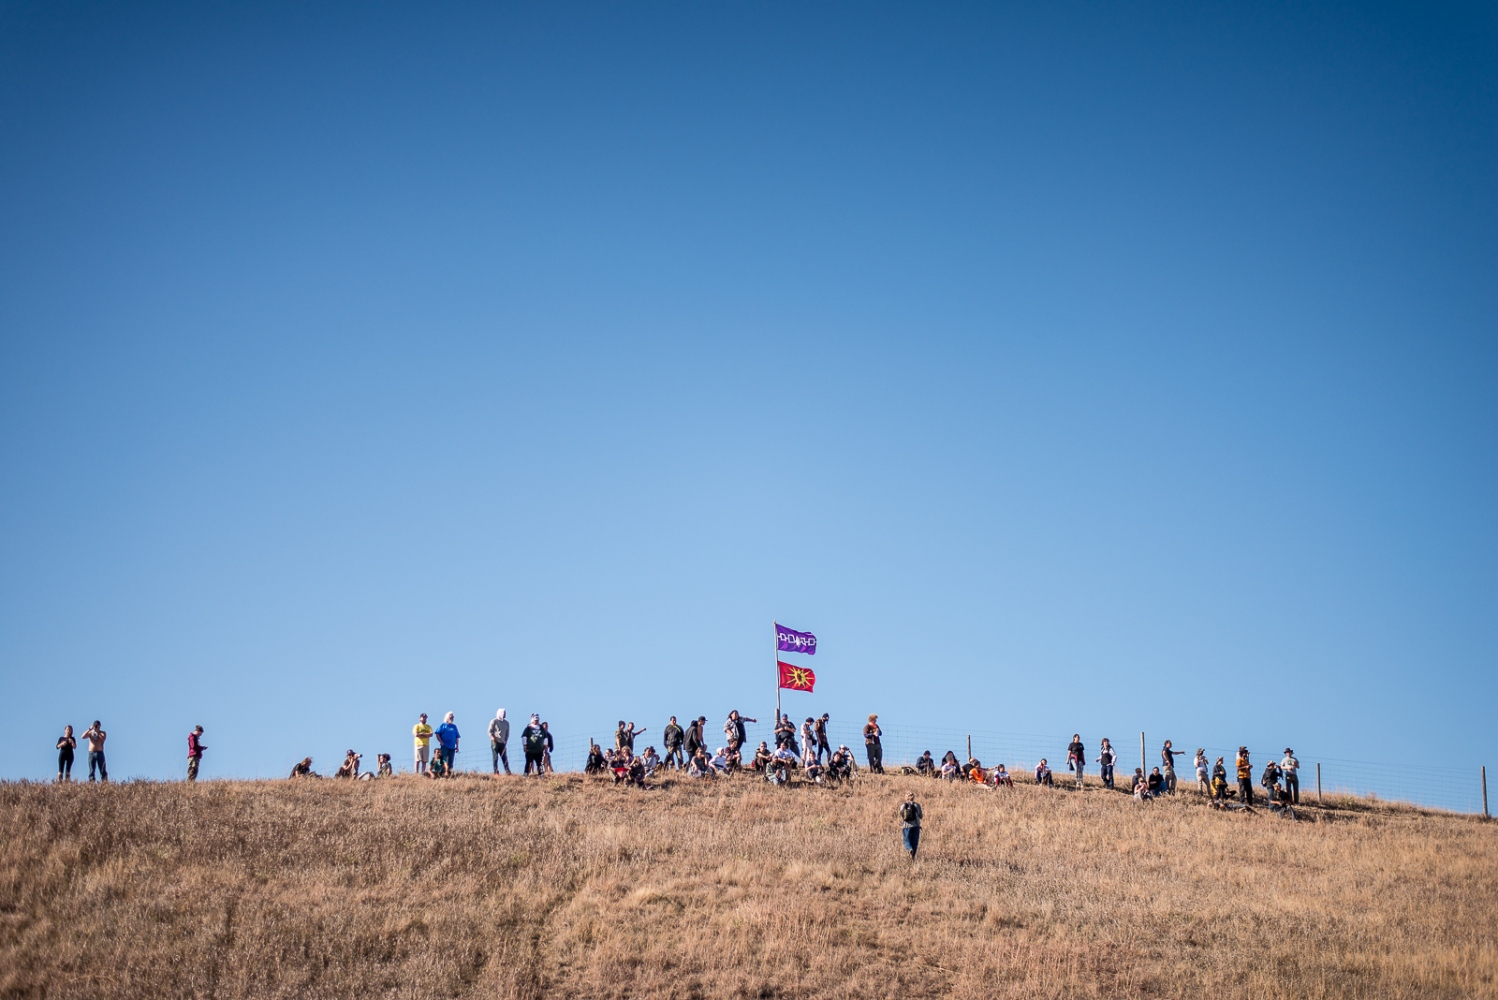 The Stand at Standing Rock